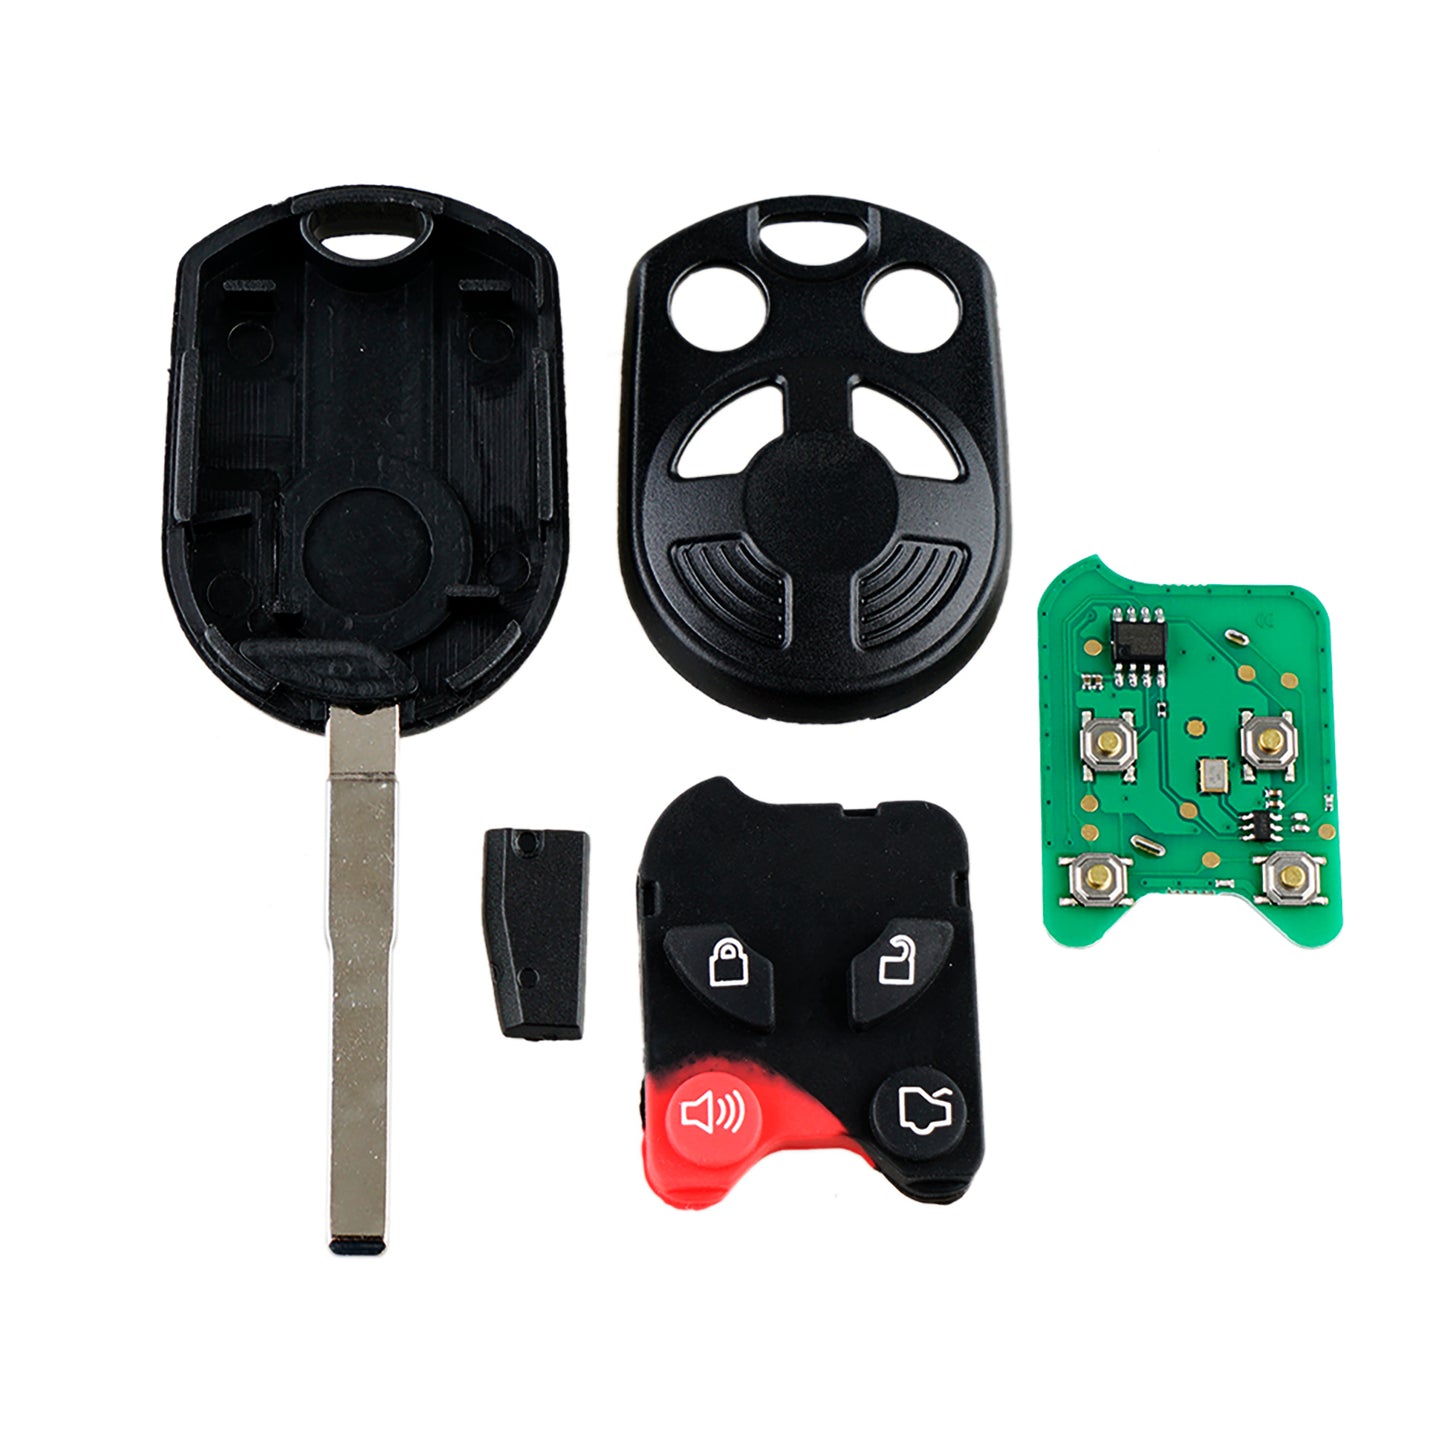 4 Buttons 315MHz Keyless Entry Fob Remote Car Key For 2006-2019 Ford C-Max Escape Focus Transit Connect F350 Fiesta Edge Expedition Explorer Five Hundred Flex Freestyle Fusion Mustang Taurus FCC ID: OUCD6000022 SKU : J201